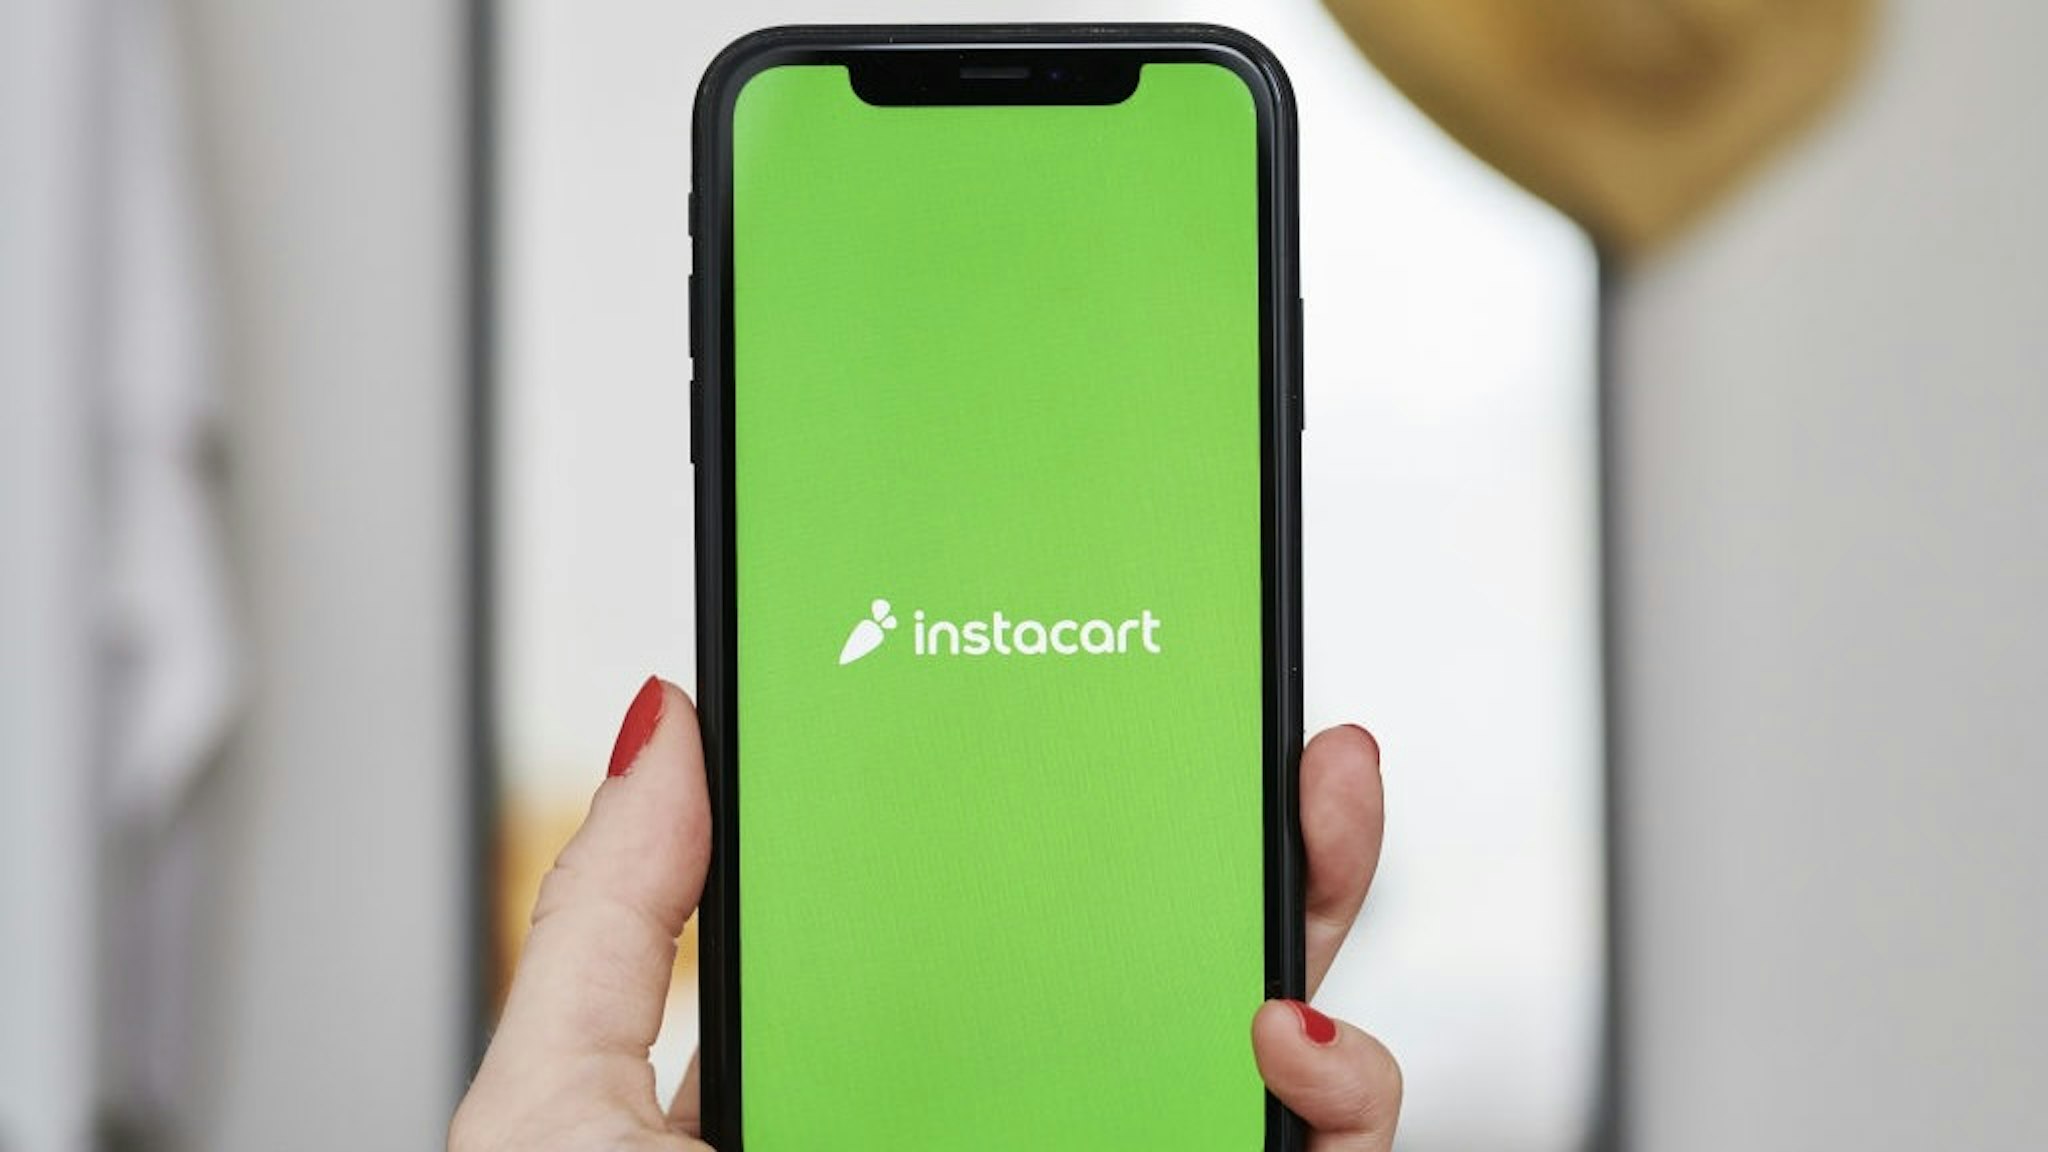 Apps Take Center Stage Amid Shelter-In-Place Covid-19 Guidelines The logo for the Instacart Inc. application is displayed on an Apple Inc. iPhone in an arranged photograph taken in the Brooklyn borough of New York, U.S., on Friday, April 10, 2020. Across the country, millions of consumers are turning to Instacart and other services to fill their fridges via online delivery rather than brave going to a supermarket because of shelter-in-place declarations during the coronavirus pandemic. Photographer: Gabby Jones/Bloomberg via Getty Images Bloomberg / Contributor via Getty Images